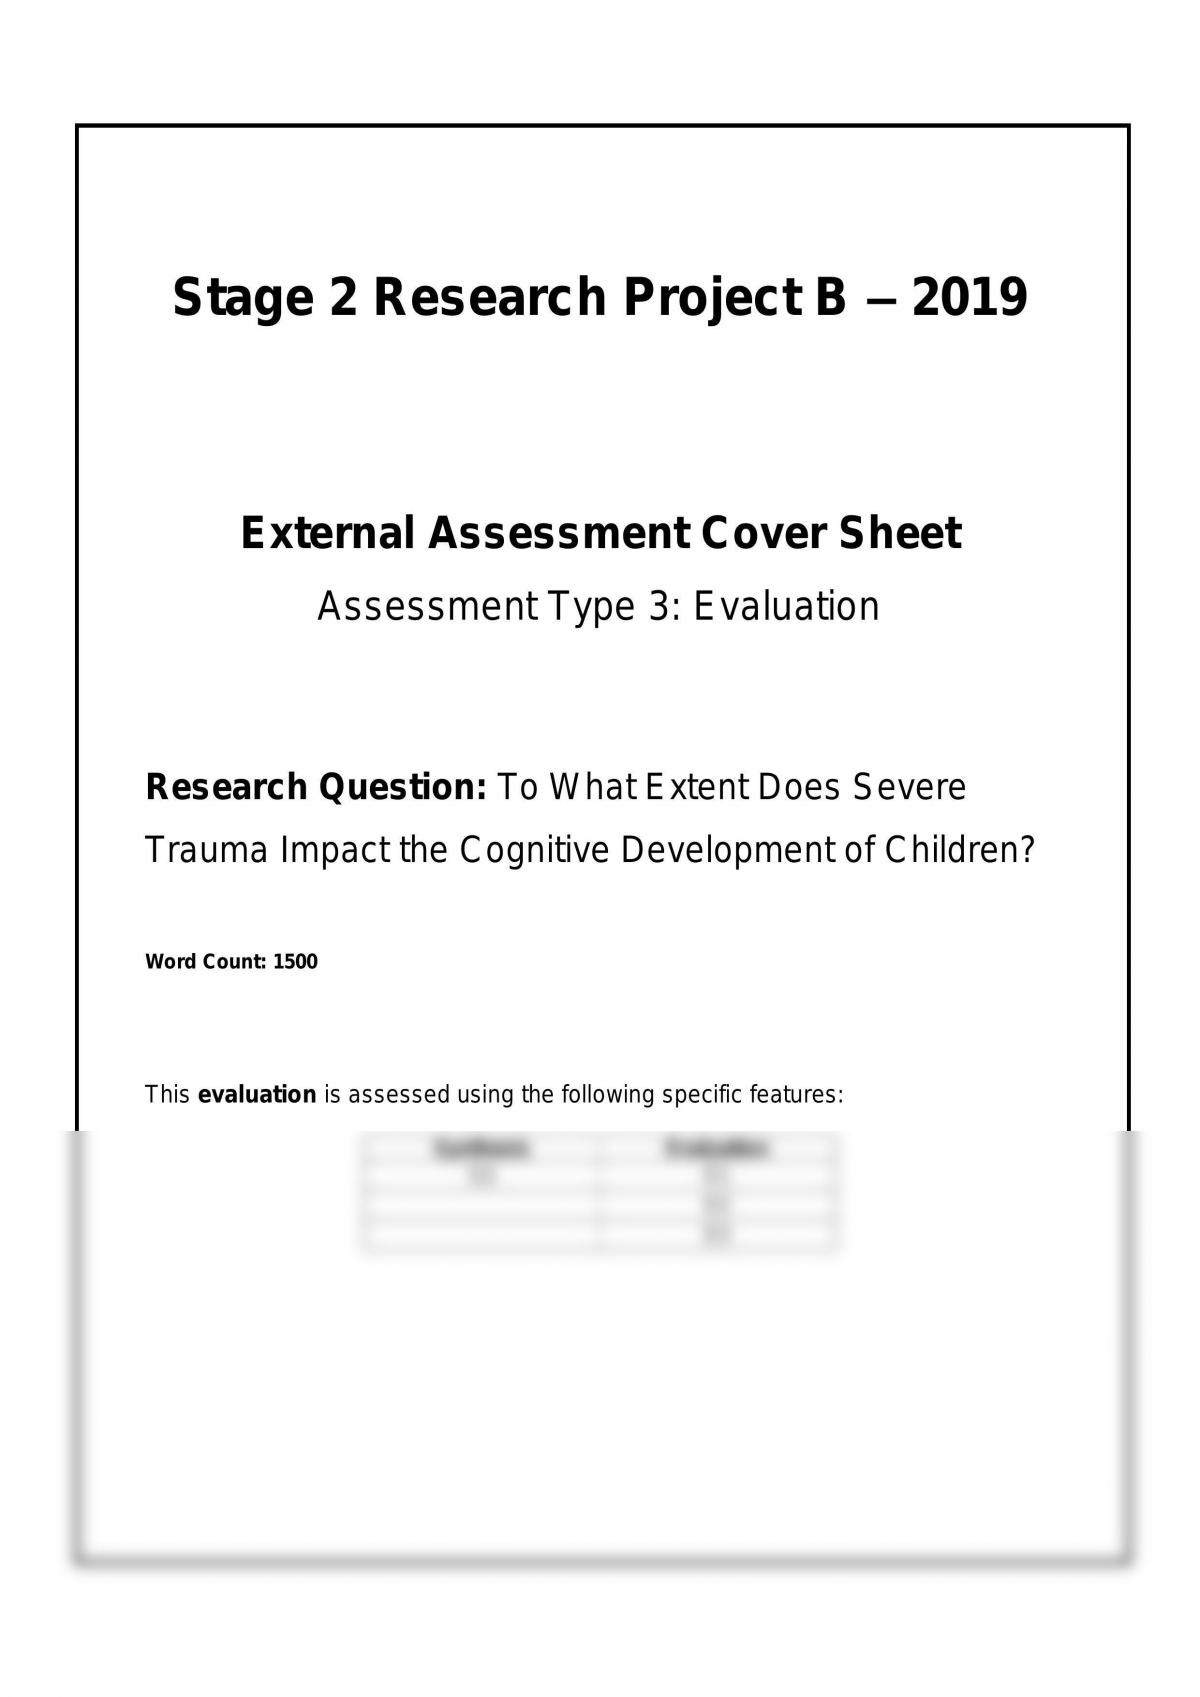 sace stage 2 research project